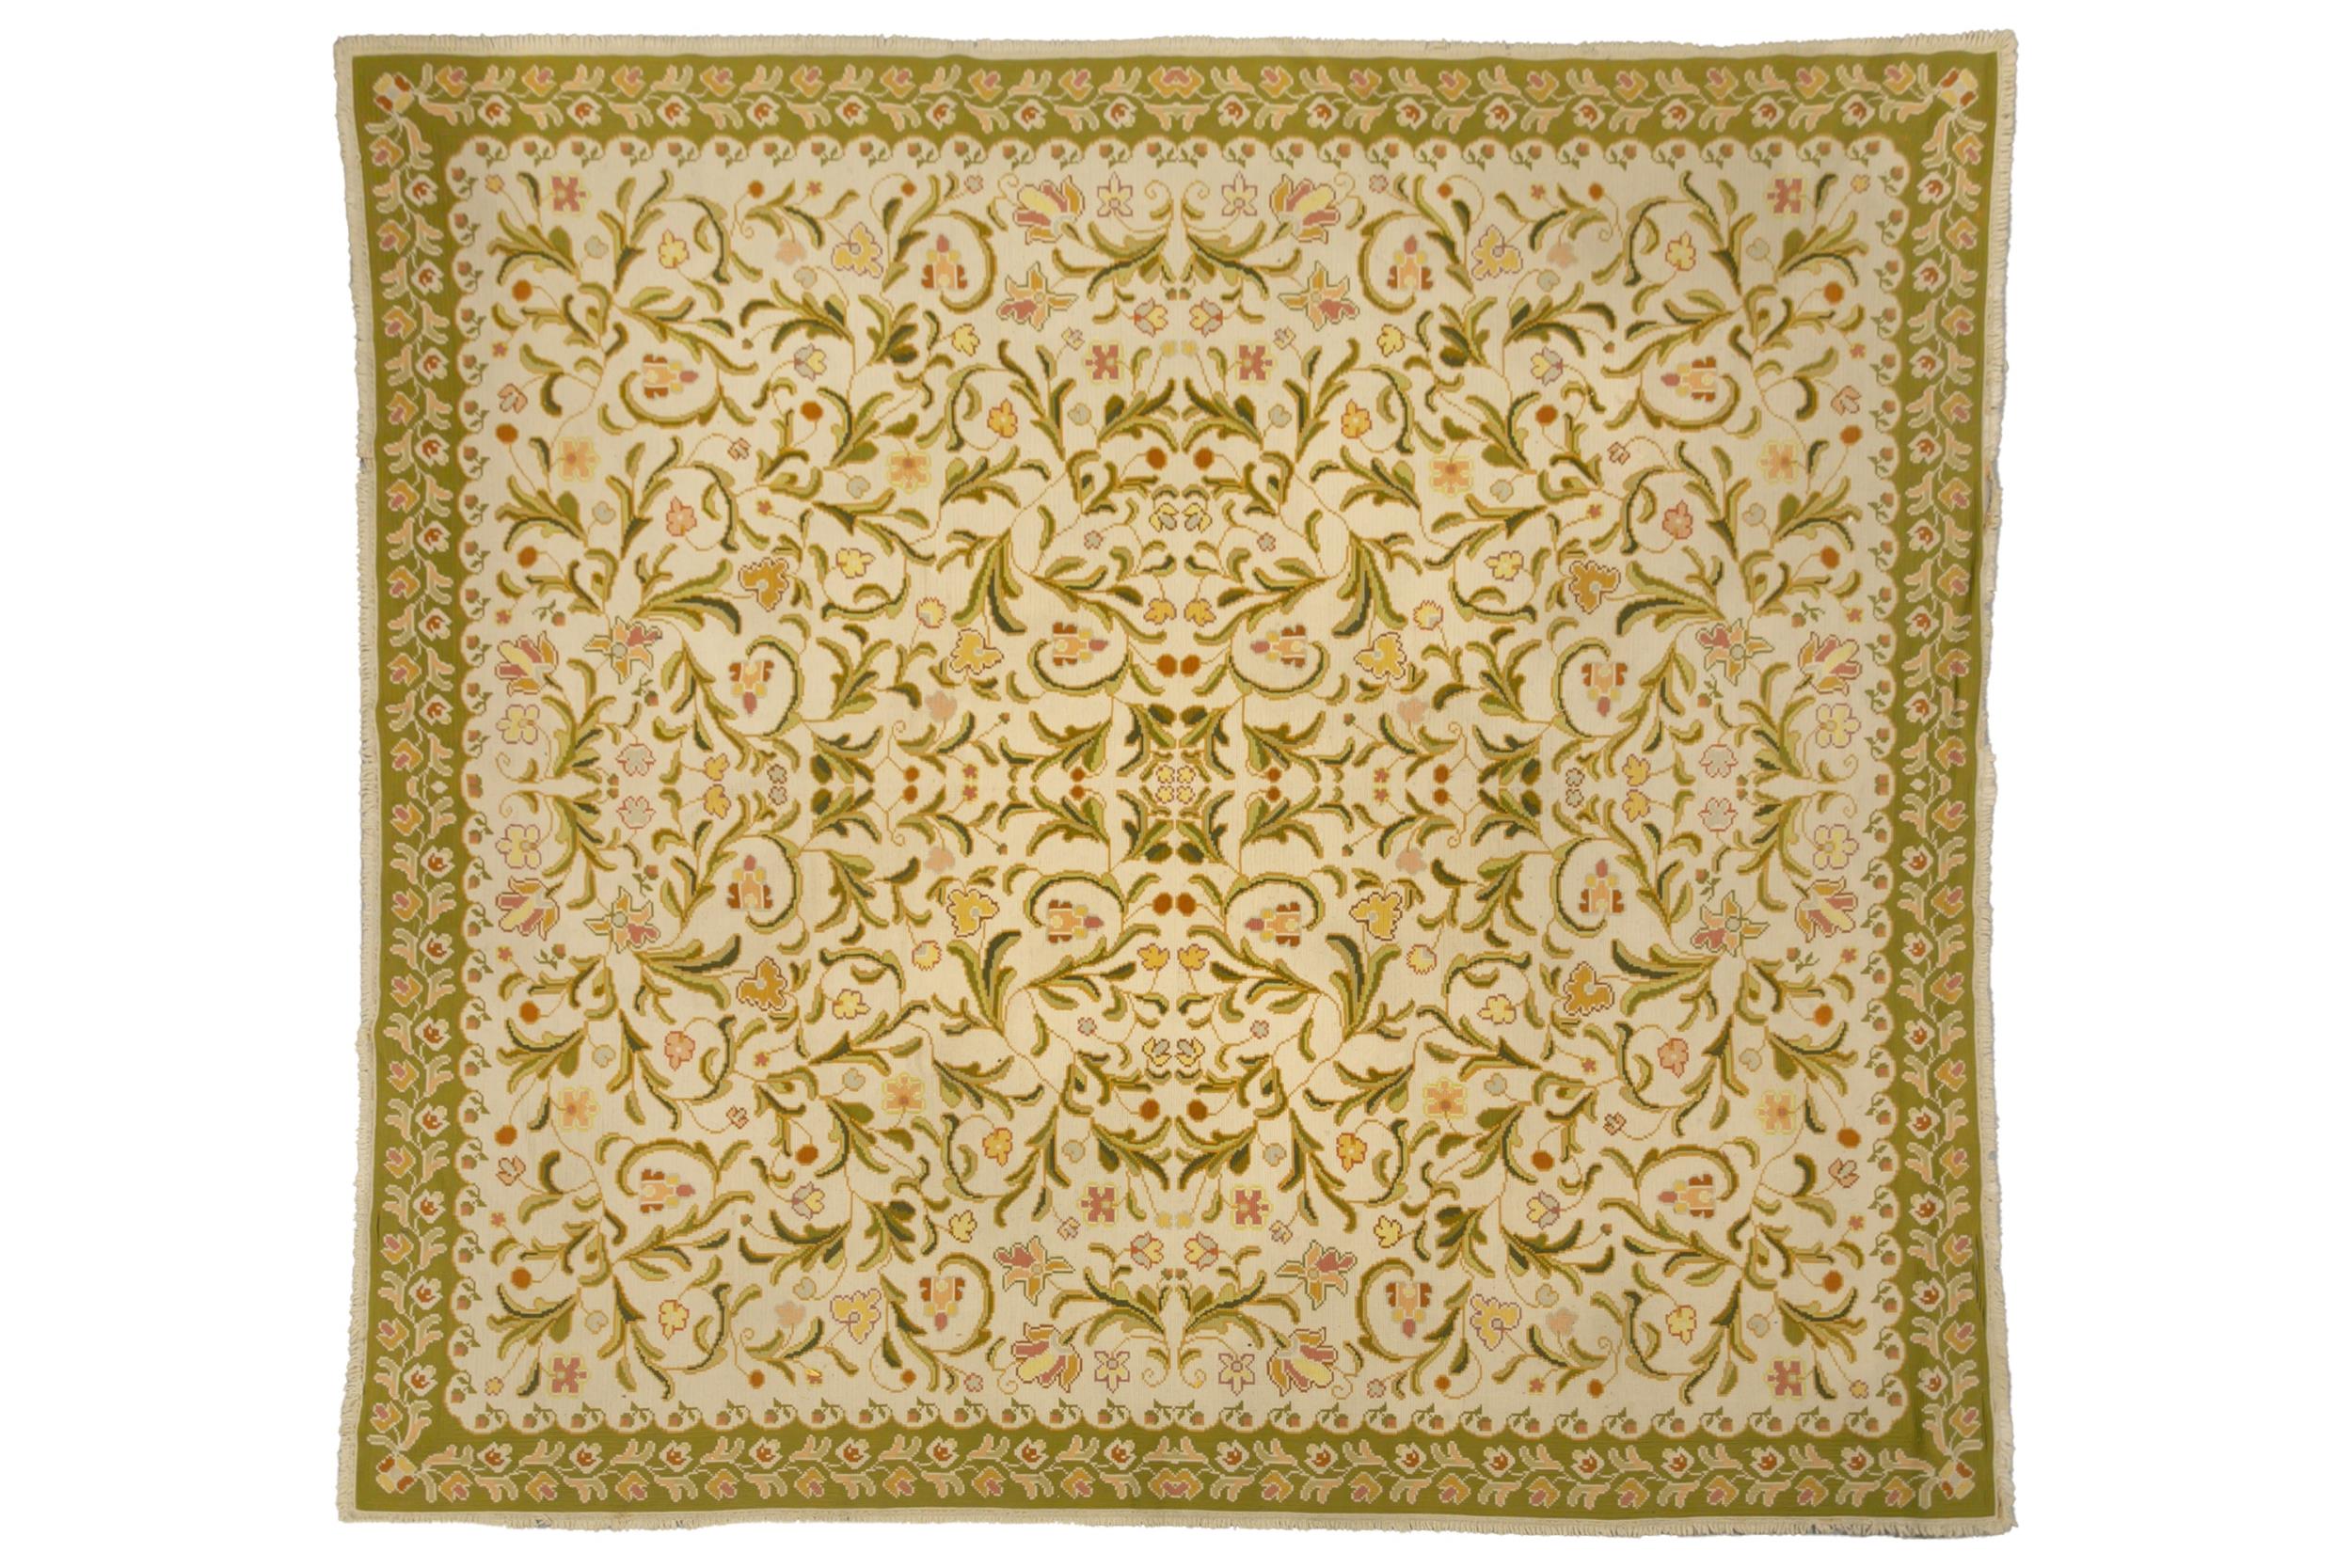 A large probably Indian flat woven Dhurrie-type carpet with iron red and sage green flowering shrubs